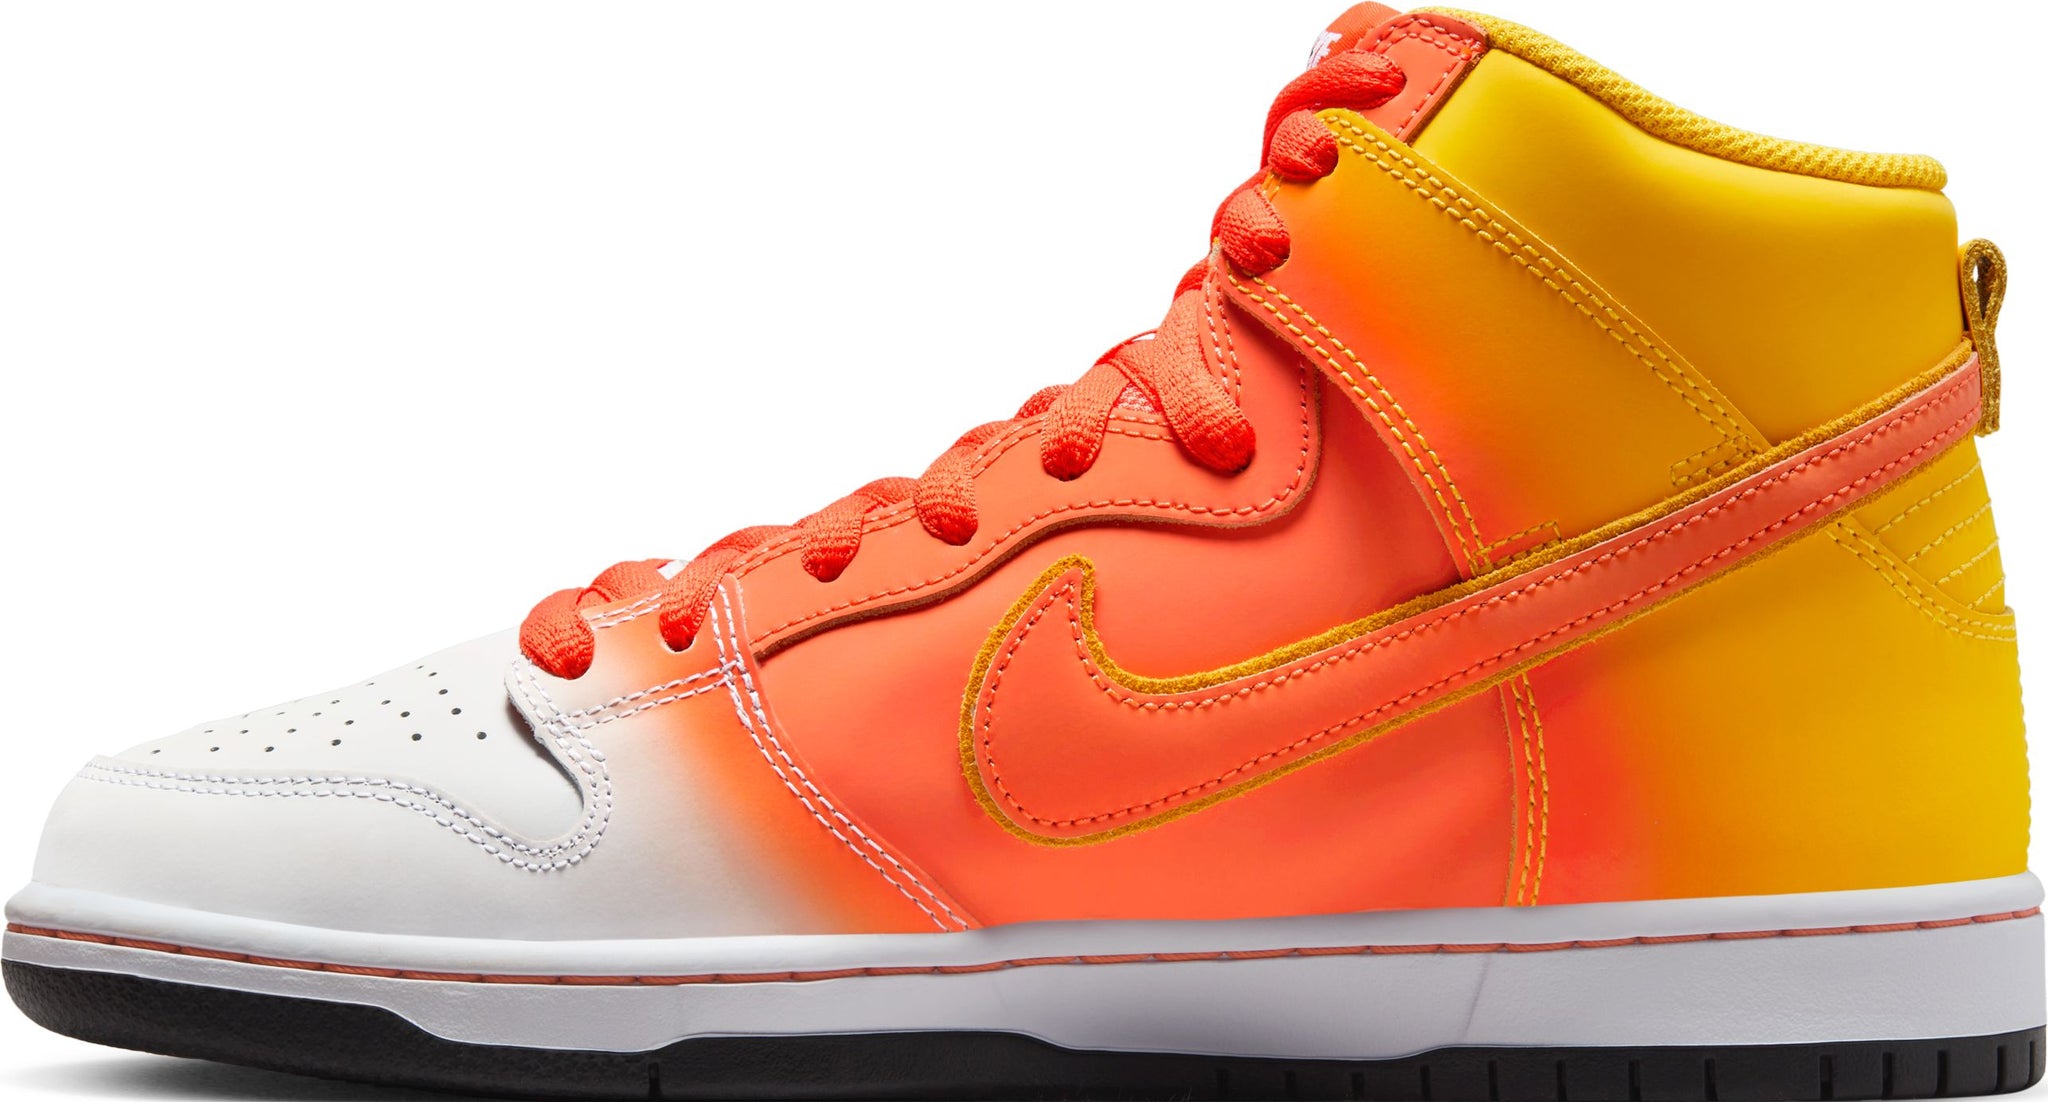 dunkNike SB Dunk High Pro "Sweet Tooth"27cm